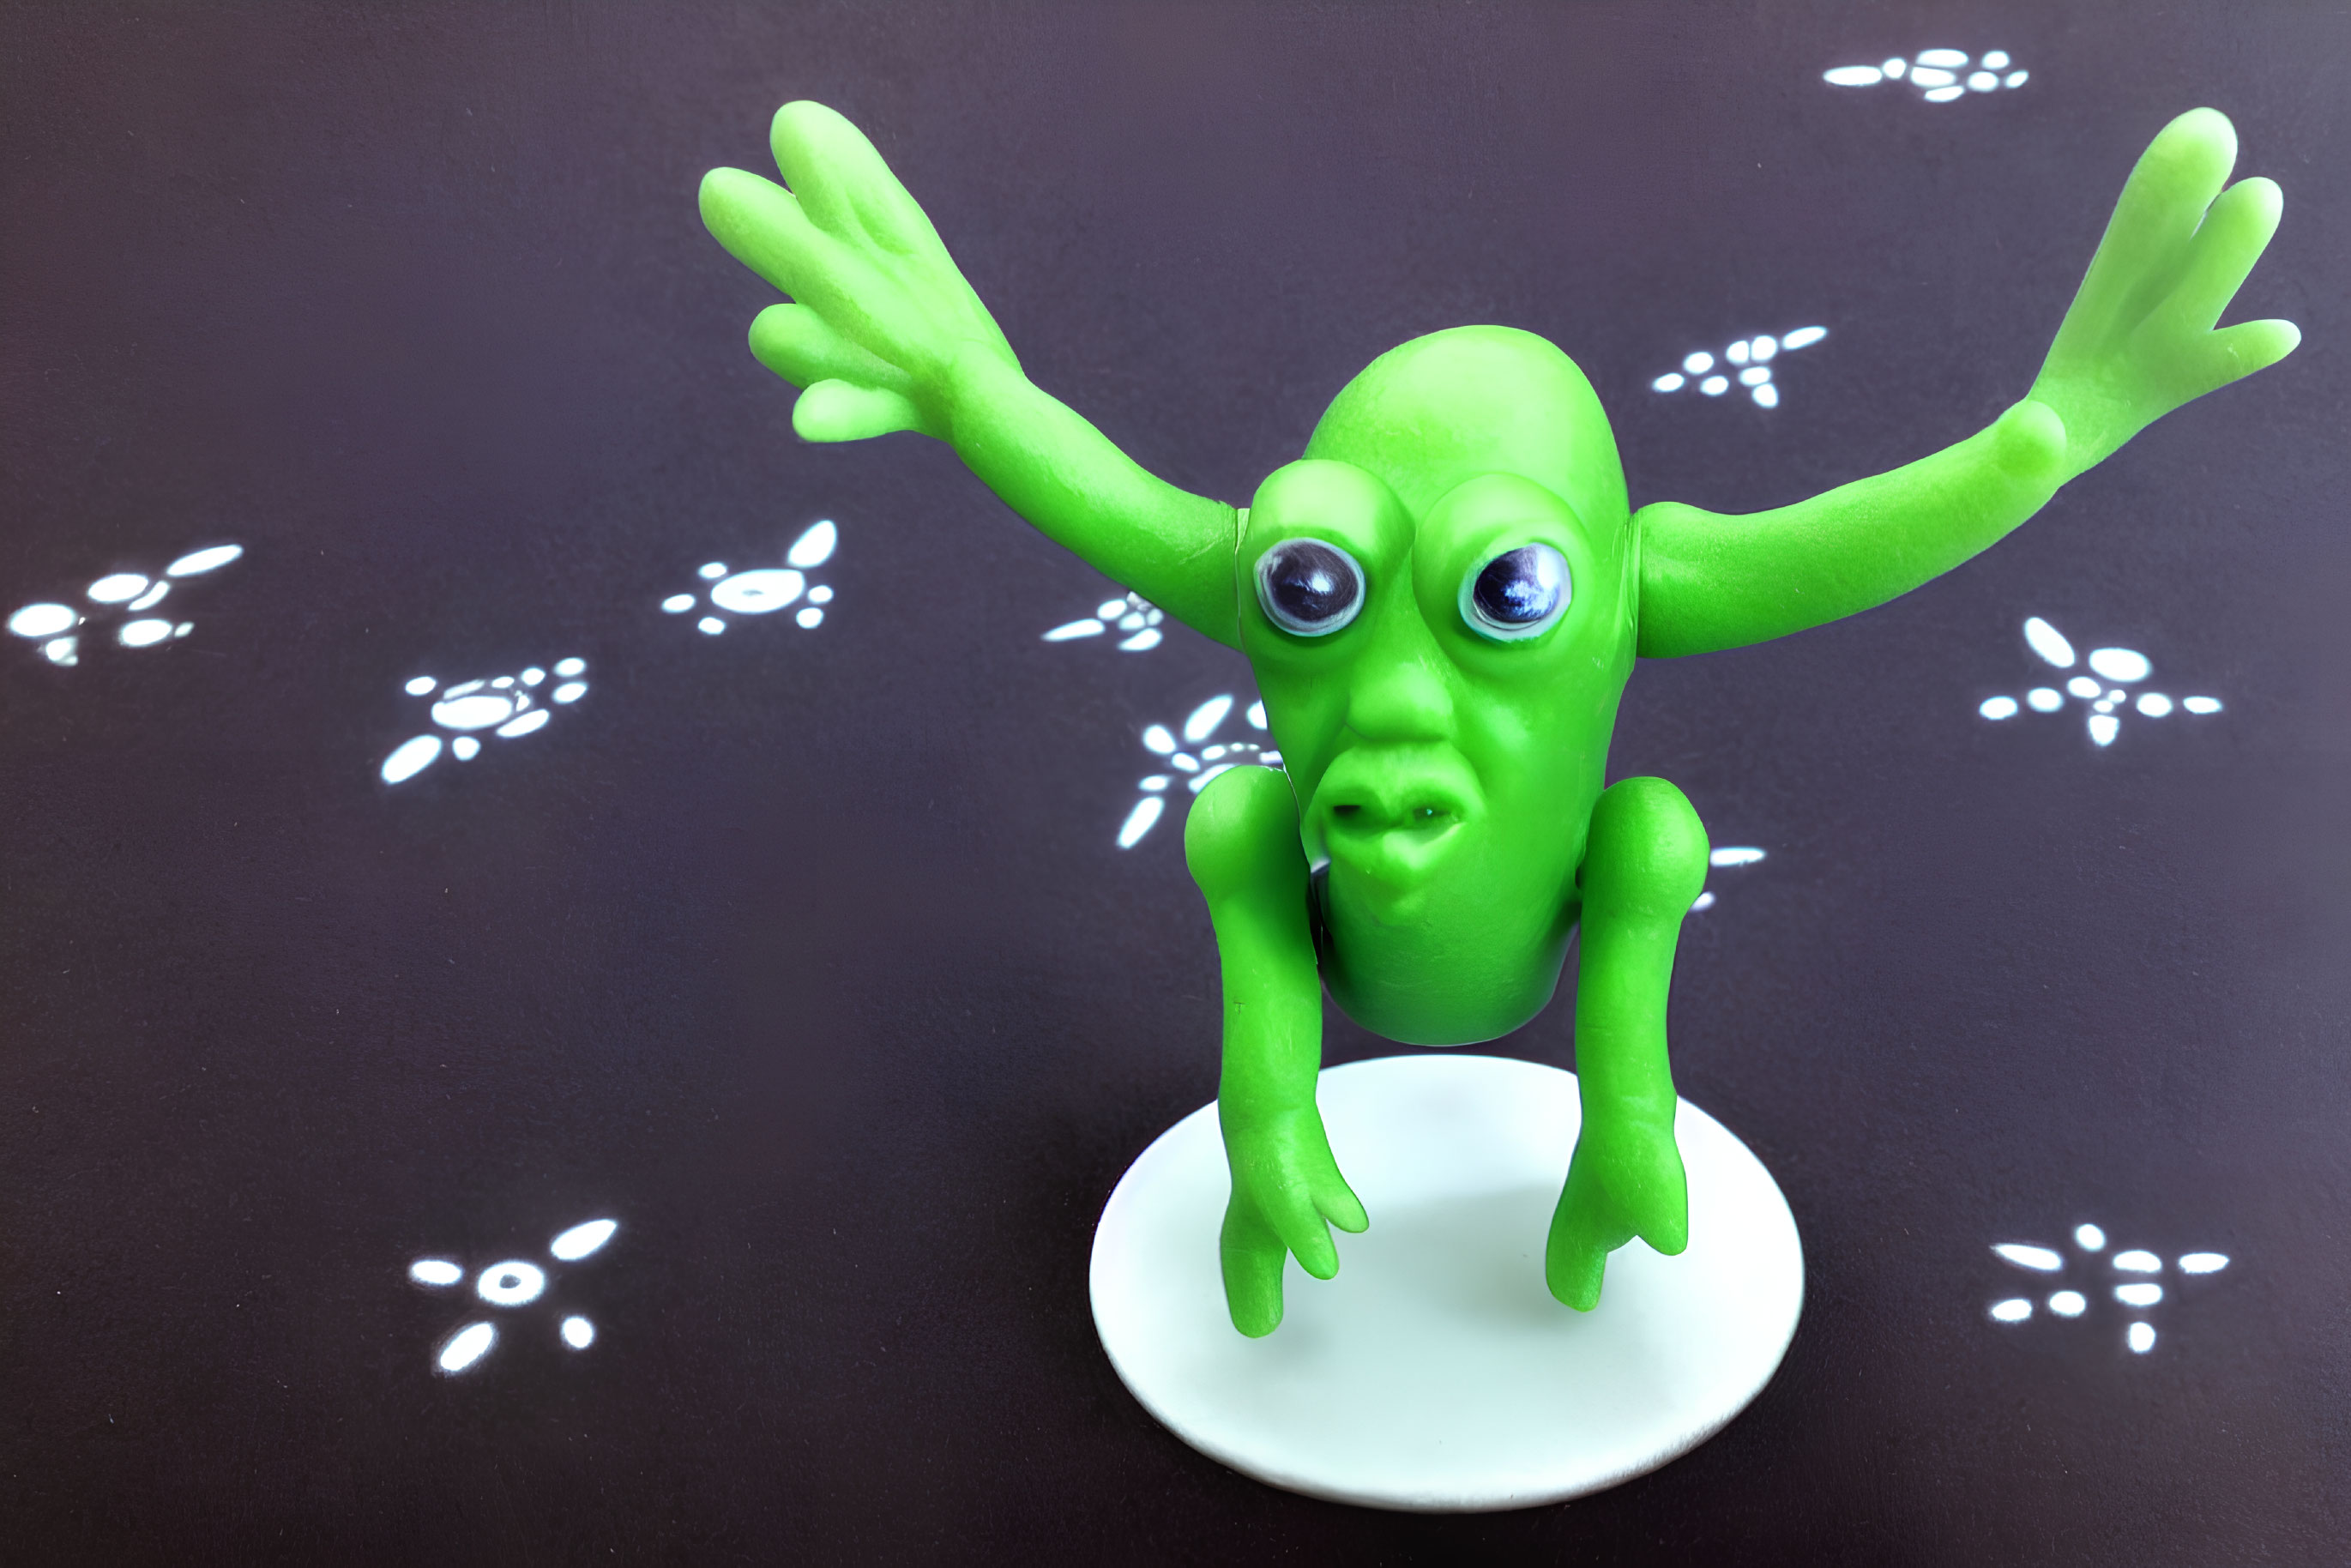 Green Alien Figurine with Large Eyes and Outstretched Arms on White Stand against Black Background